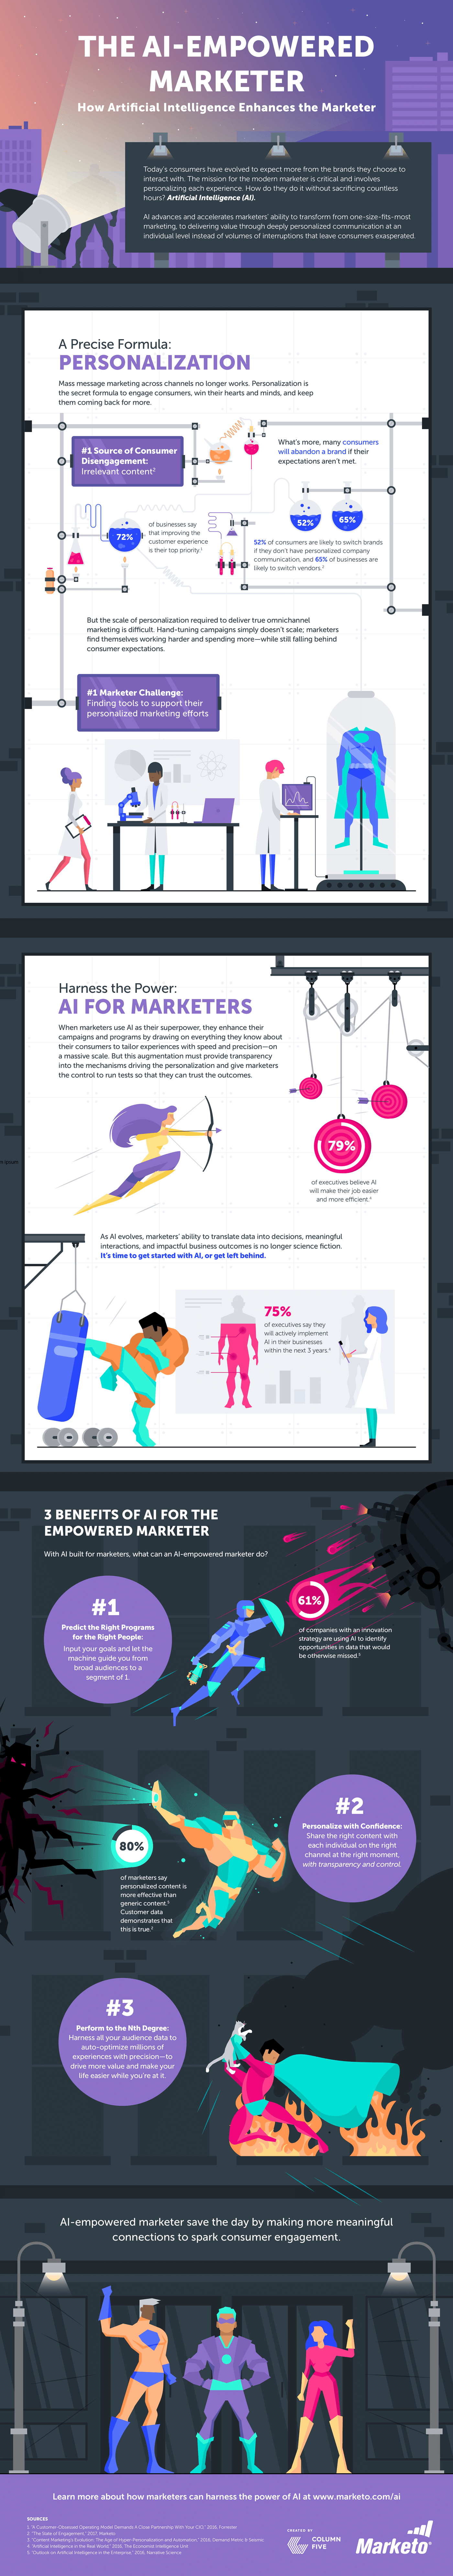 The AI-Empowered Business: How Artificial Intelligence Enhances the Marketer - #infographic